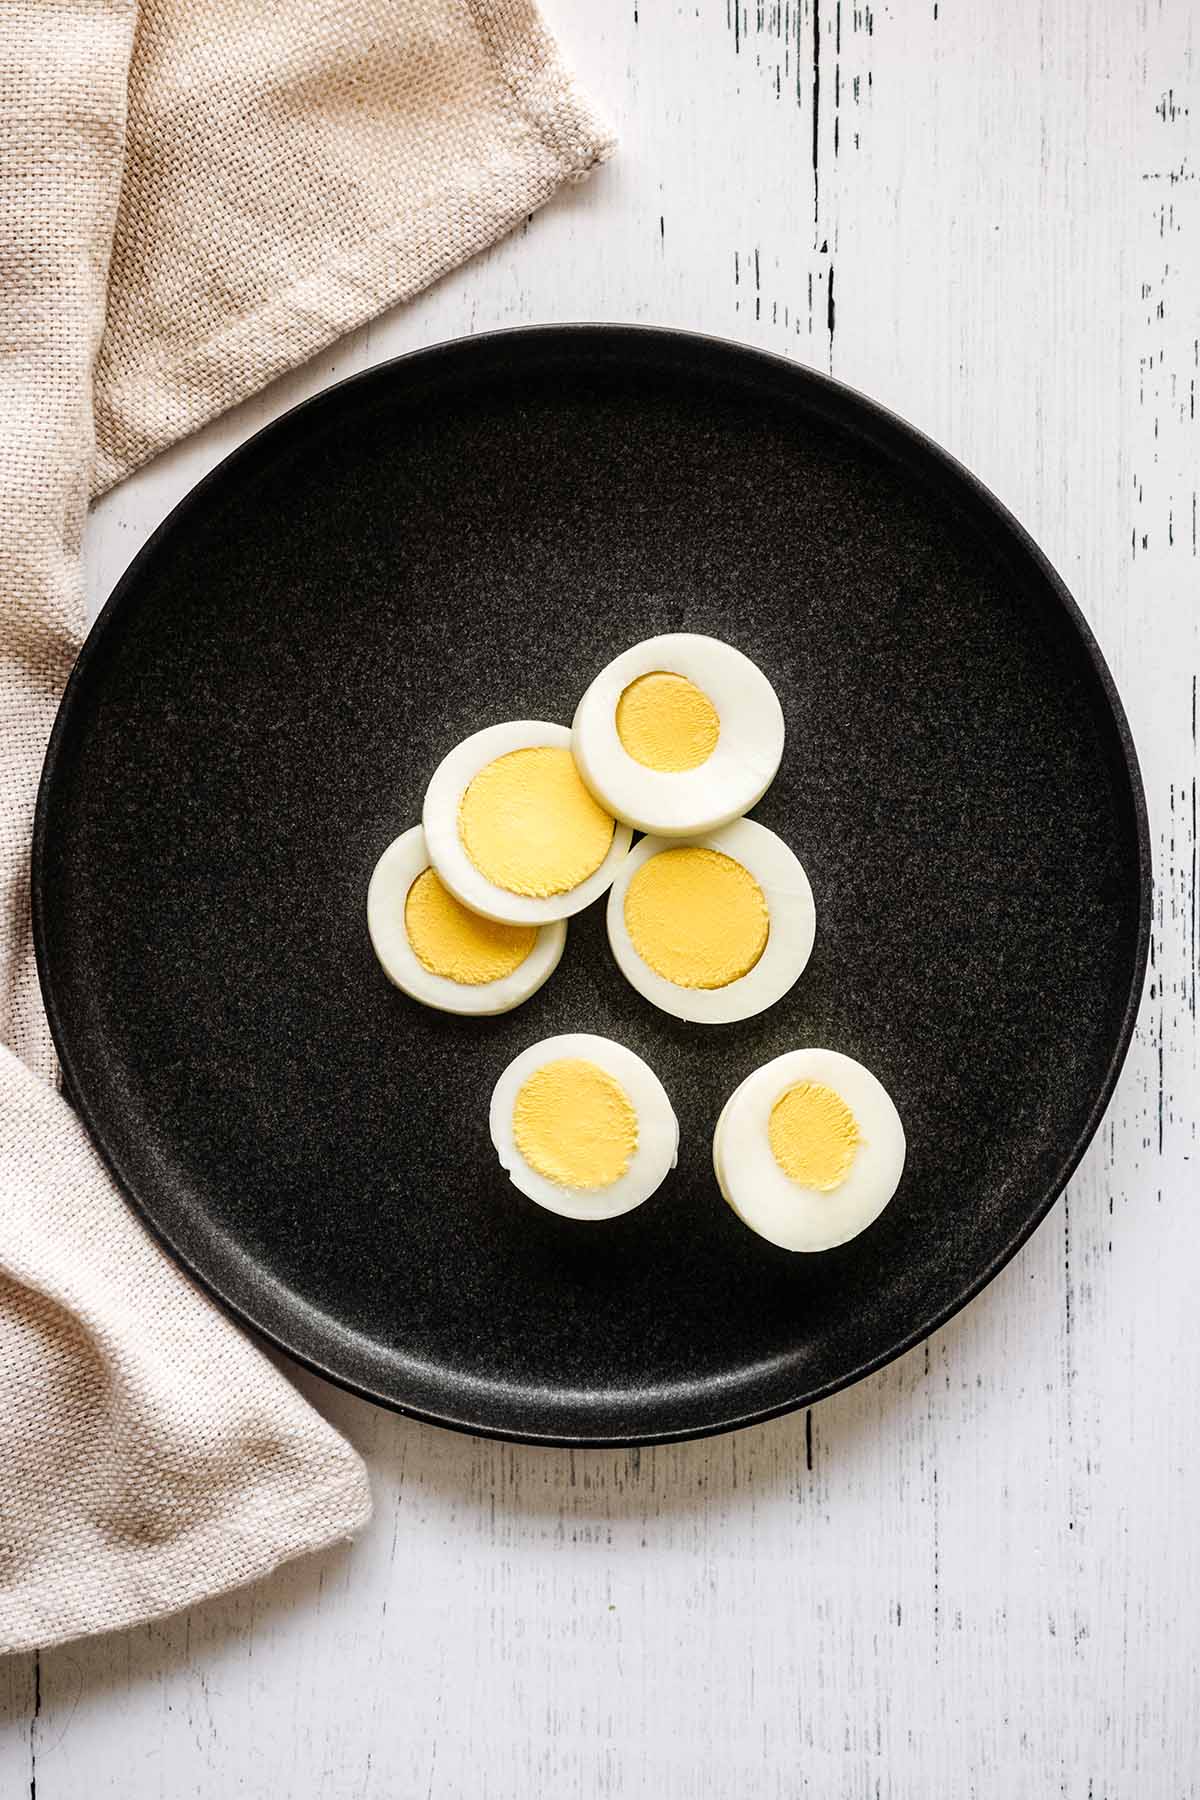 Sliced hard cooked egg on a dark grey plate with a beige napkin.